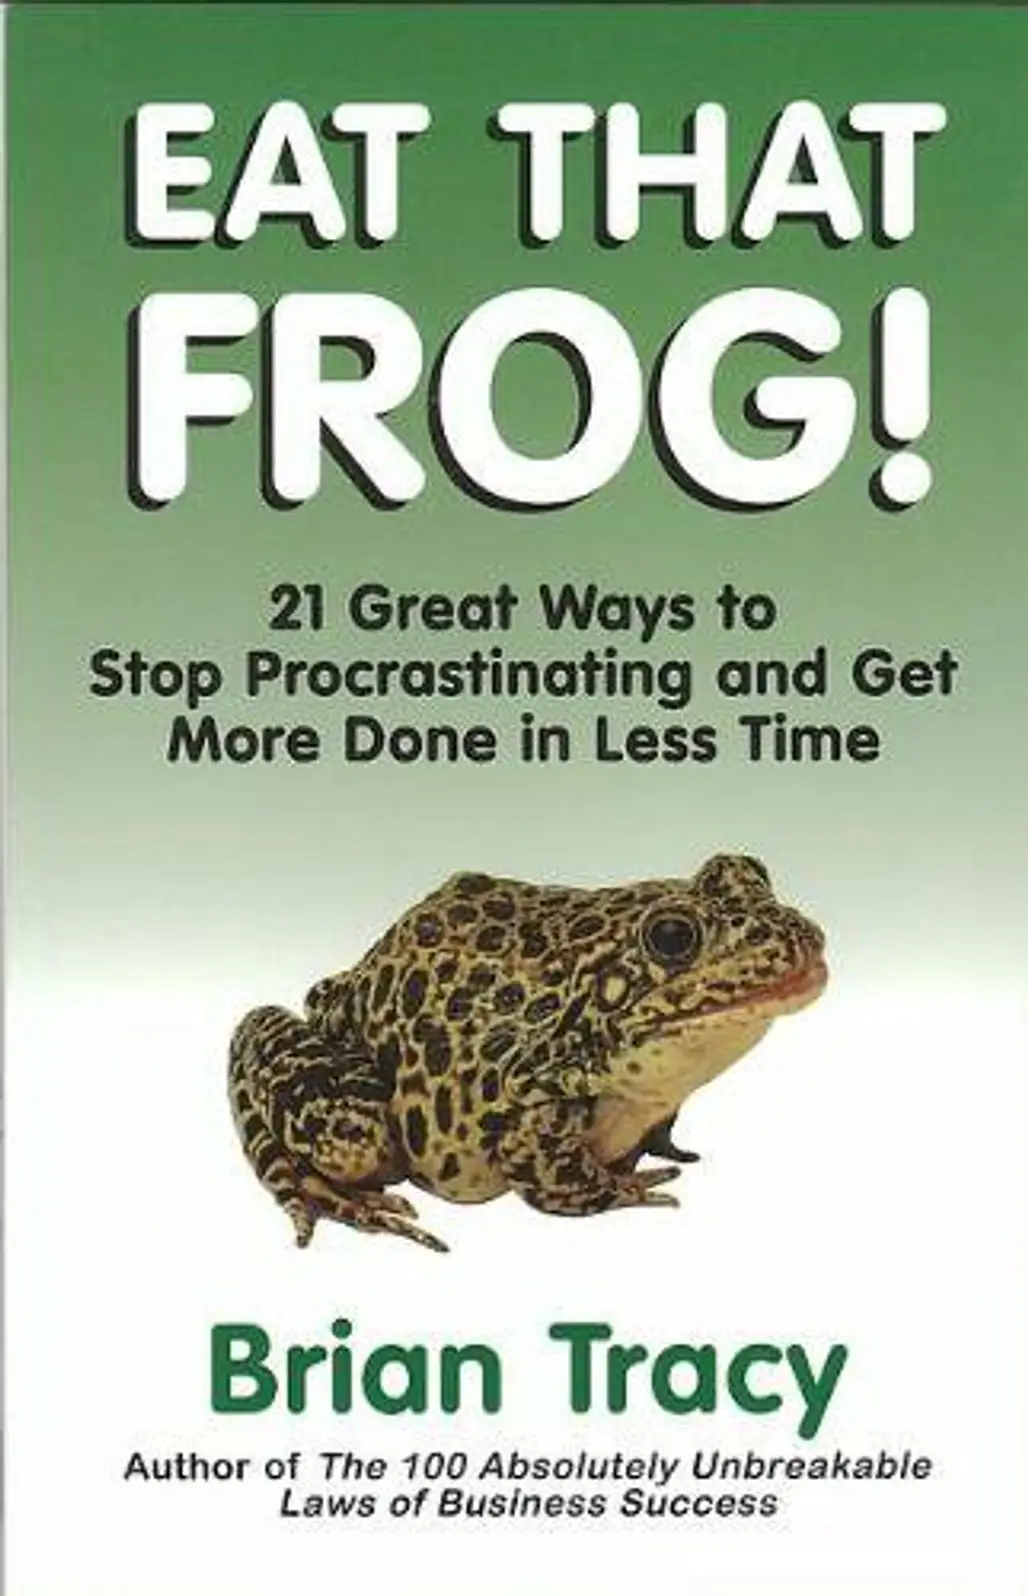 Eat That Frog!: 21 Great Ways to Stop Procrastinating and Get More Done in Less Time ...